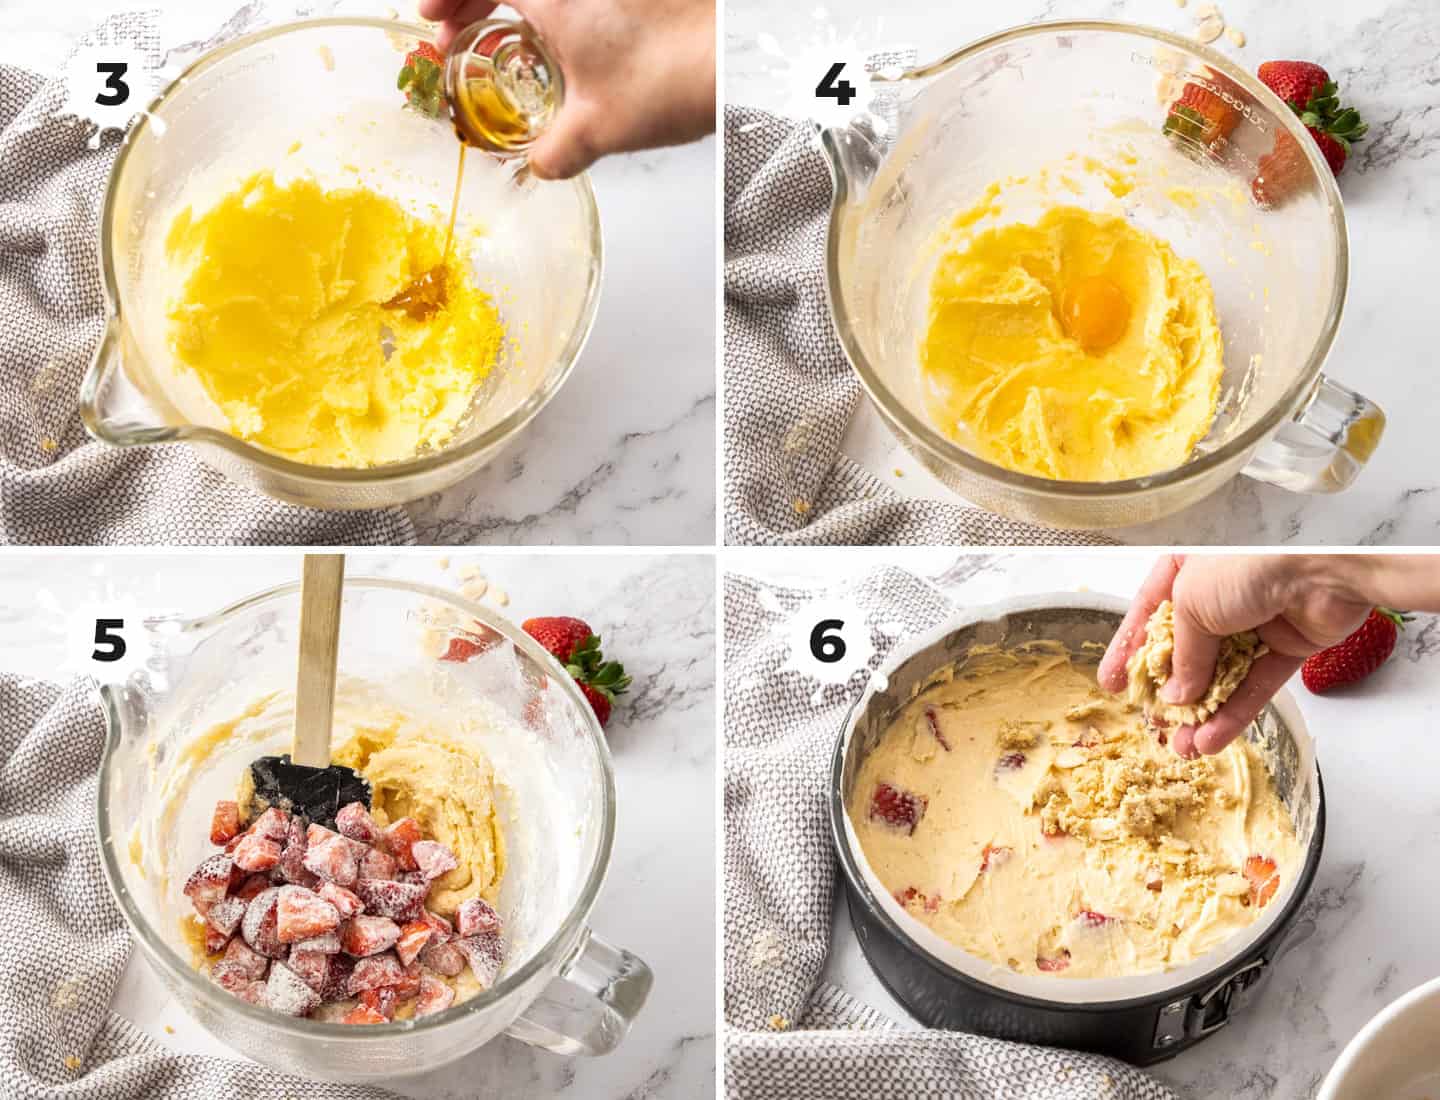 A collage of 4 images showing how to mix the cake batter.